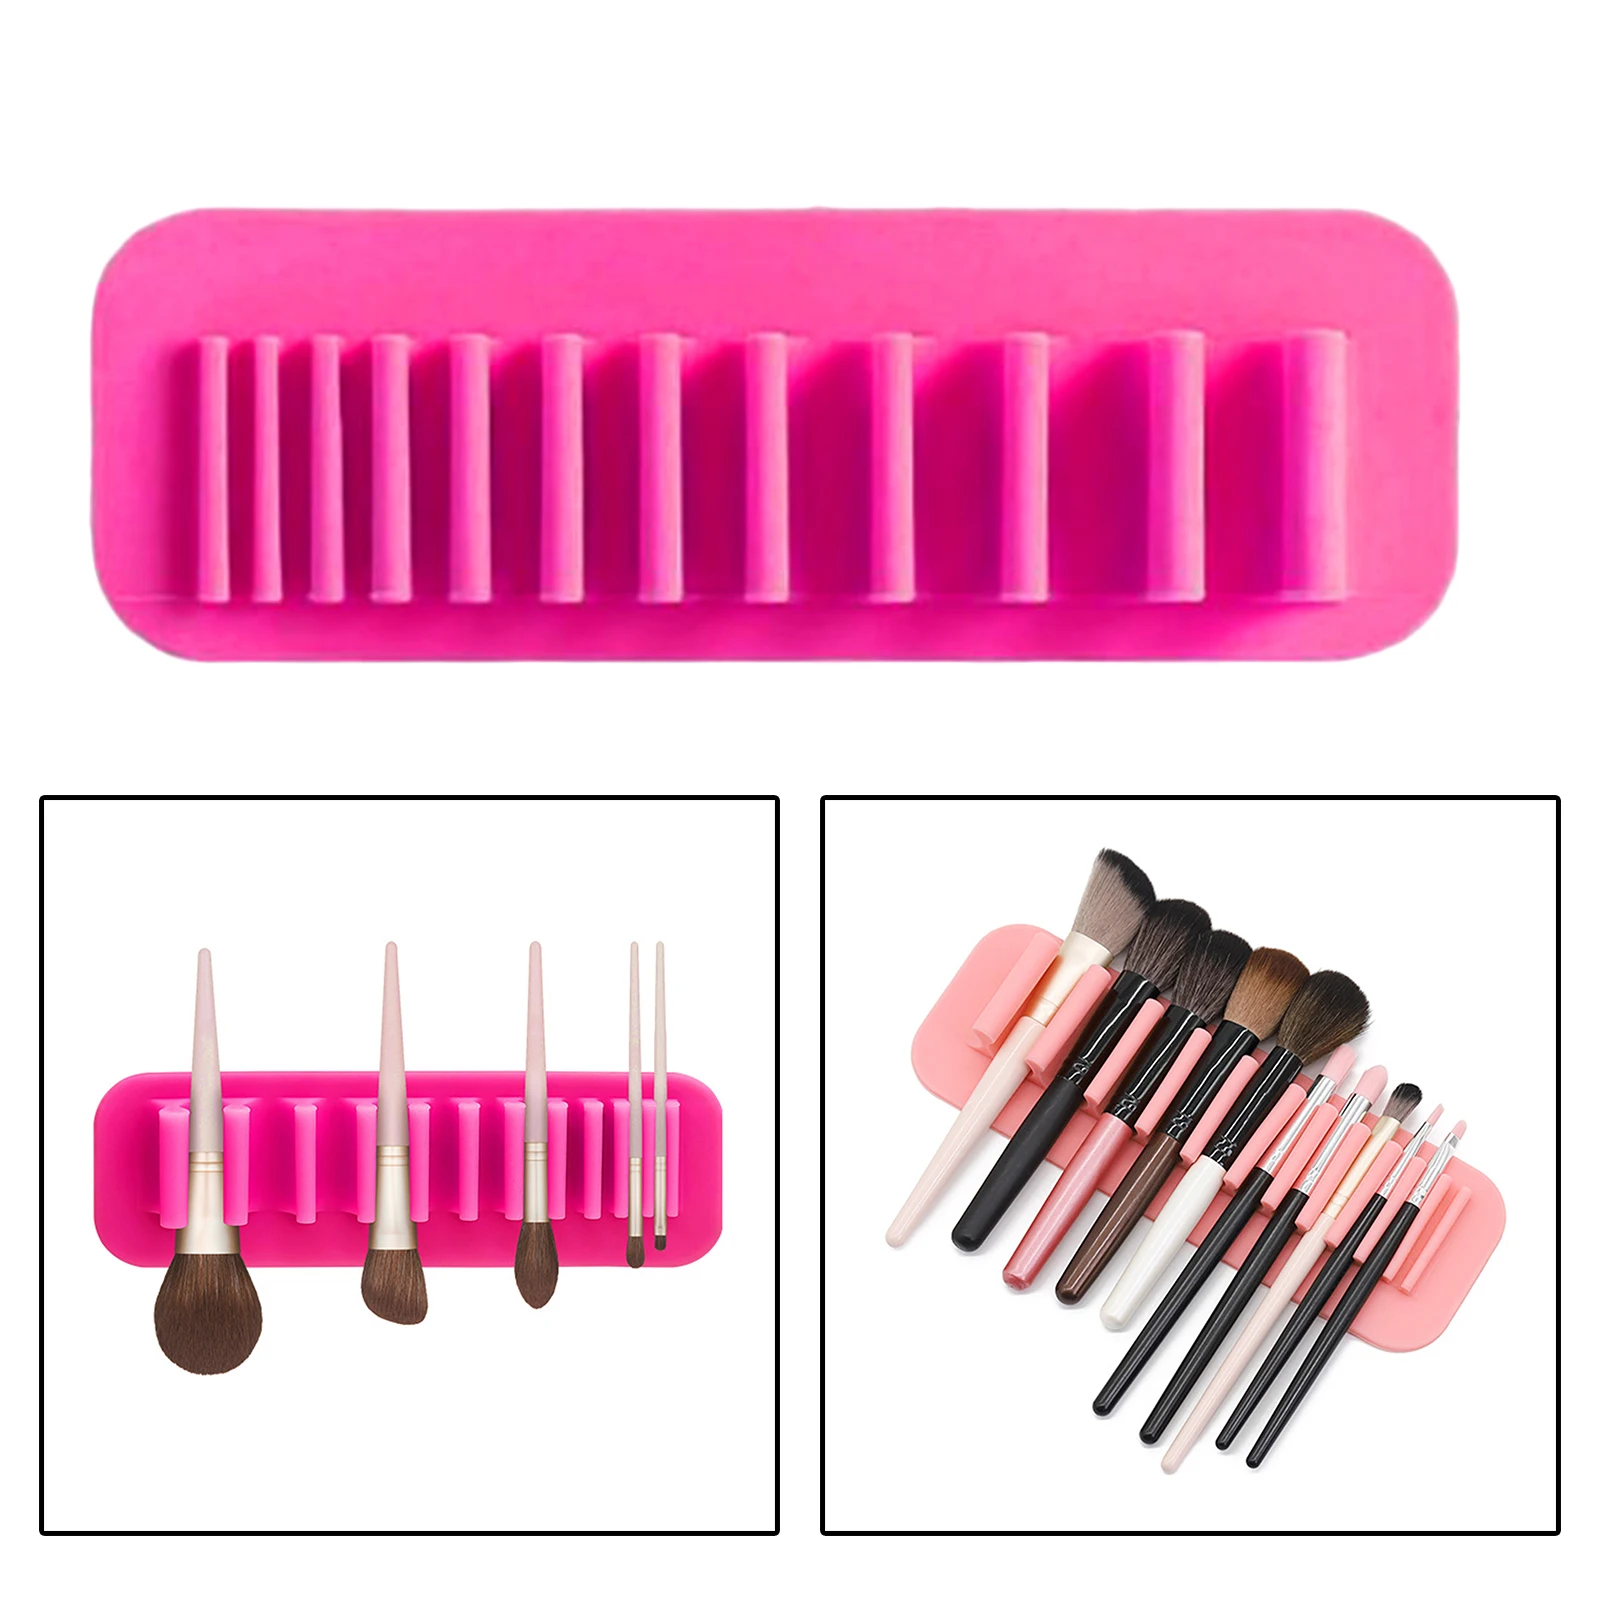 Silicone Wall Mount Nail Makeup Brush Holder Display Rack Shelf Stand Hanger Case Space Saving Beauty Cosmetic Tools